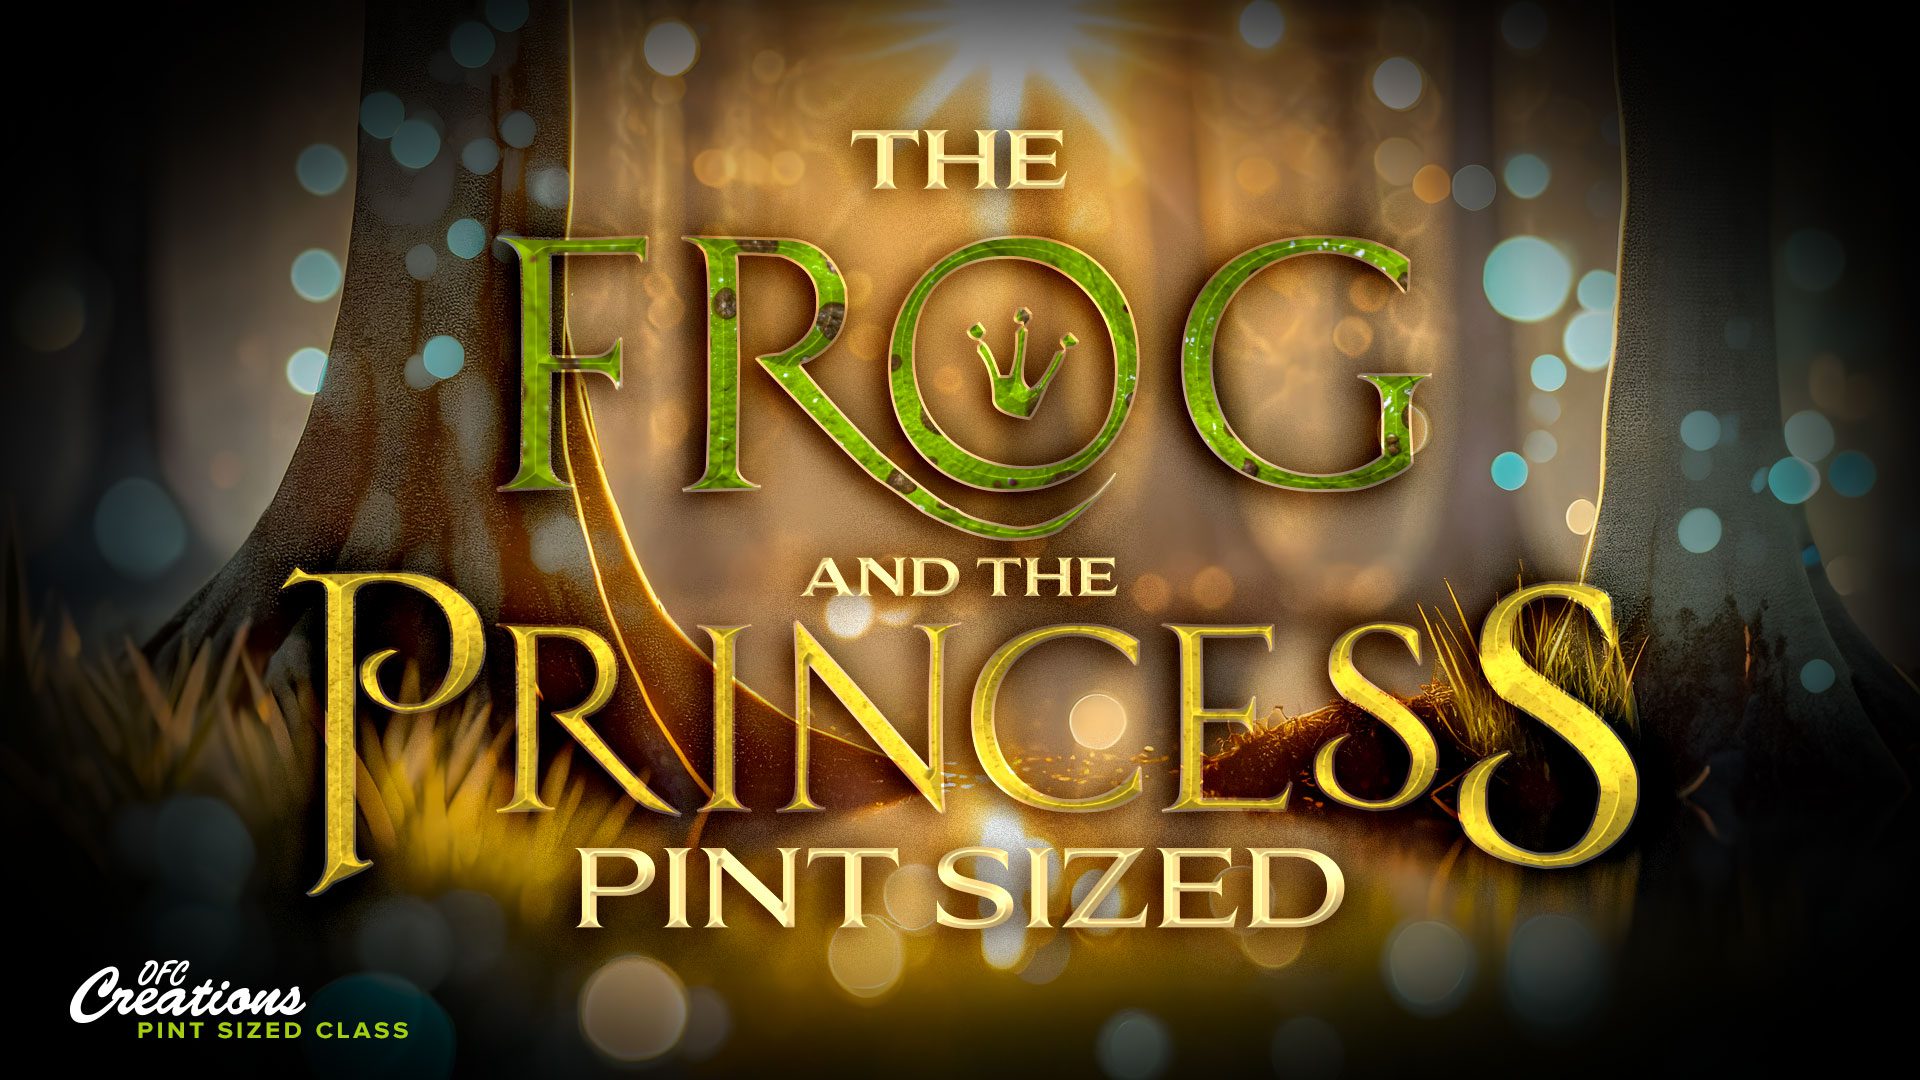 THE FROG AND THE PRINCESS PINT SIZED